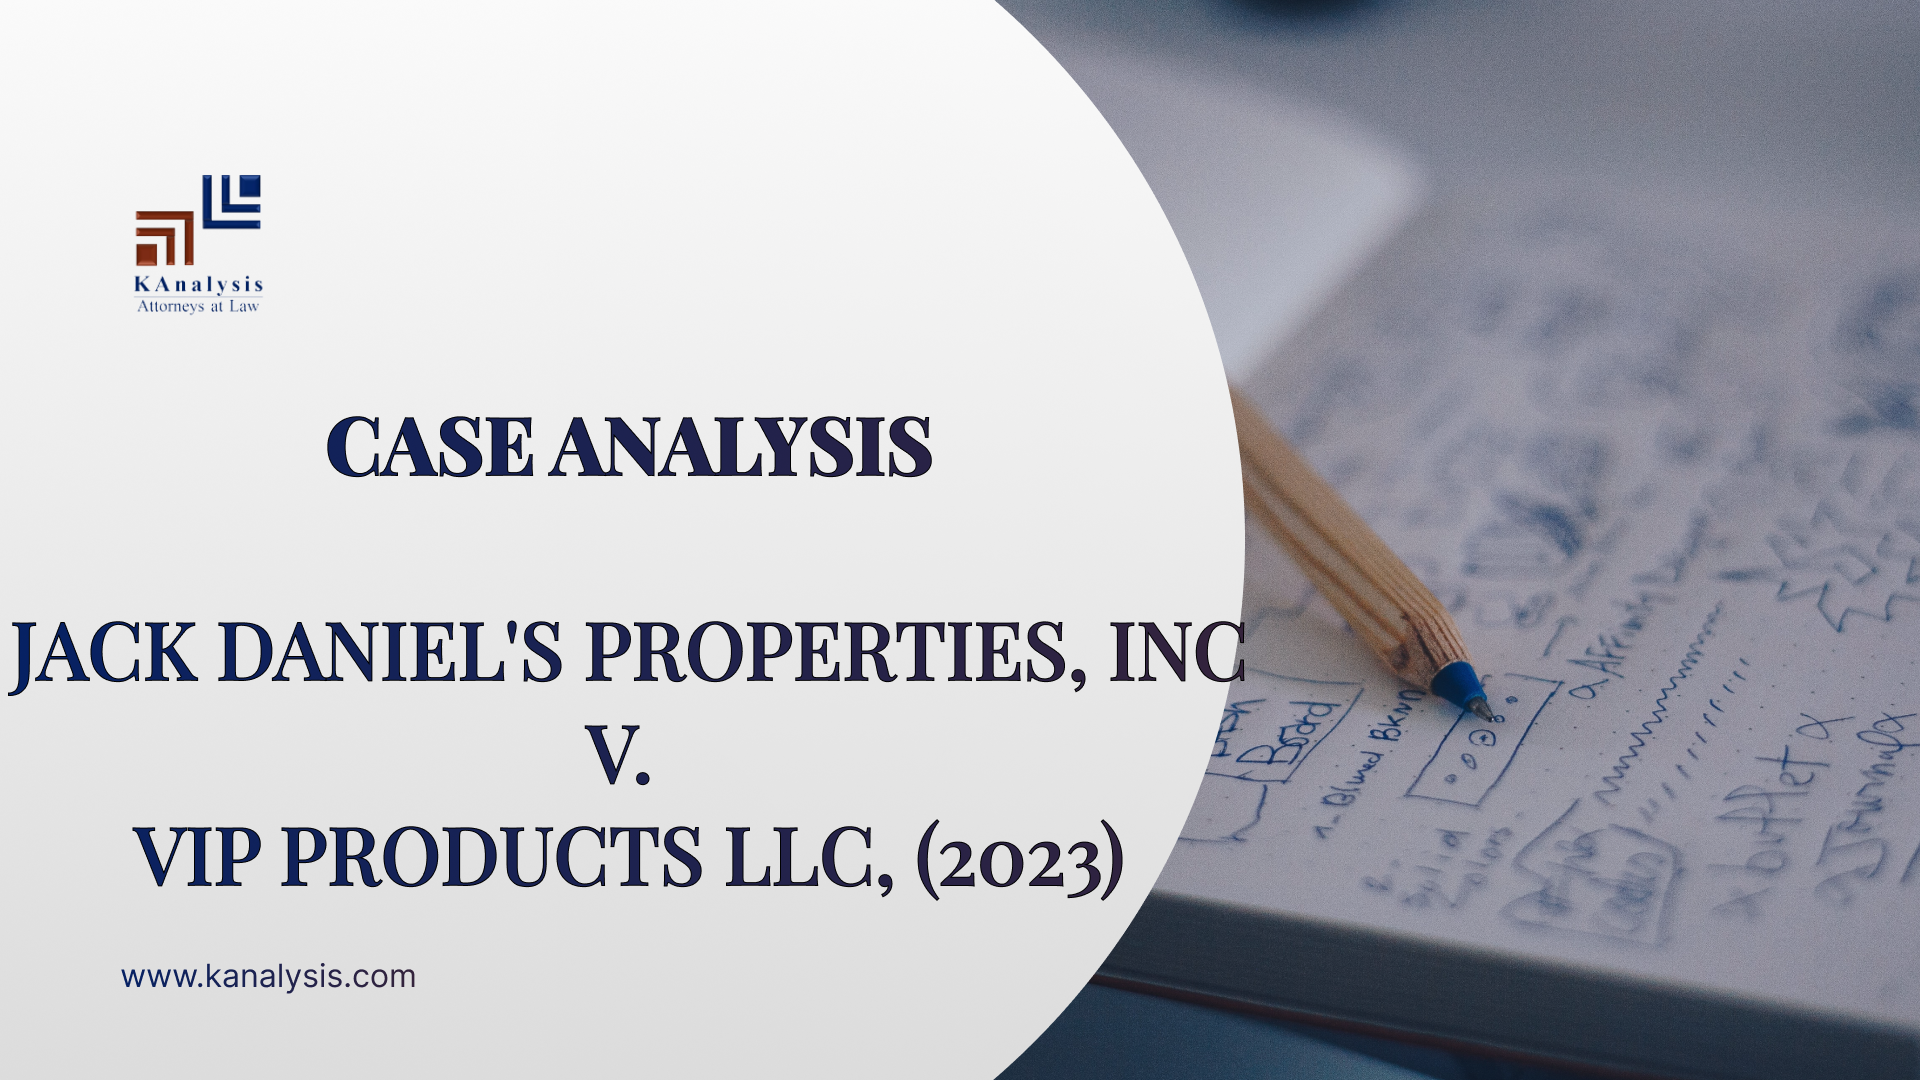 You are currently viewing <a href="https://supreme.justia.com/cases/federal/us/599/22-148/"><strong>CASE ANALYSIS: JACK DANIEL’S PROPERTIES, INC V. VIP PRODUCTS LLC, (2023)</strong></a>